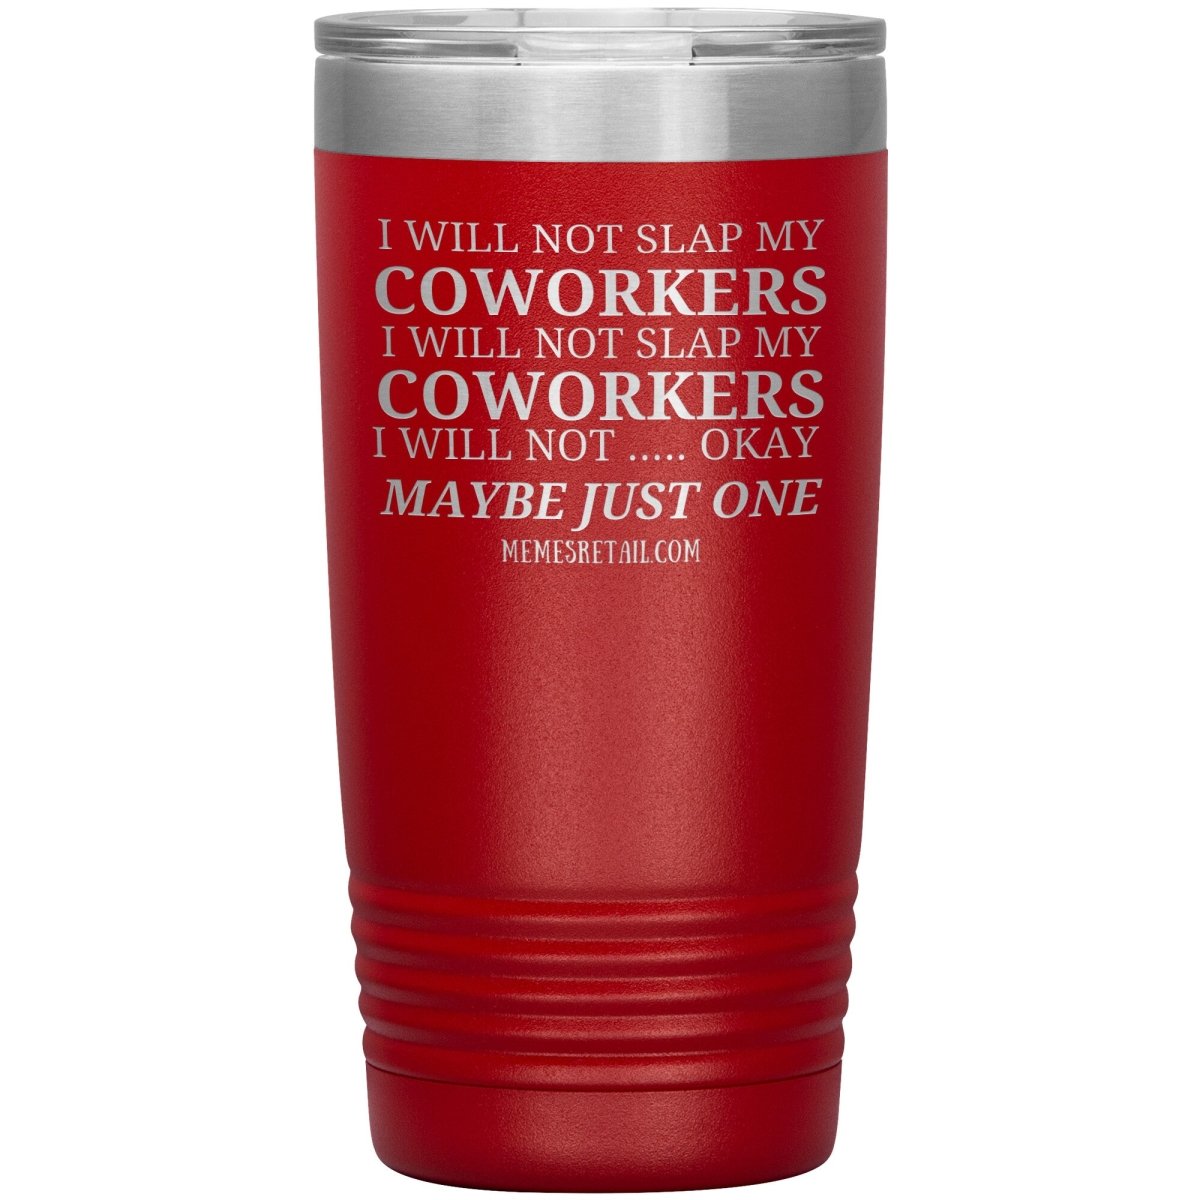 I will not slap my coworker… Tumblers, 20oz Insulated Tumbler / Red - MemesRetail.com